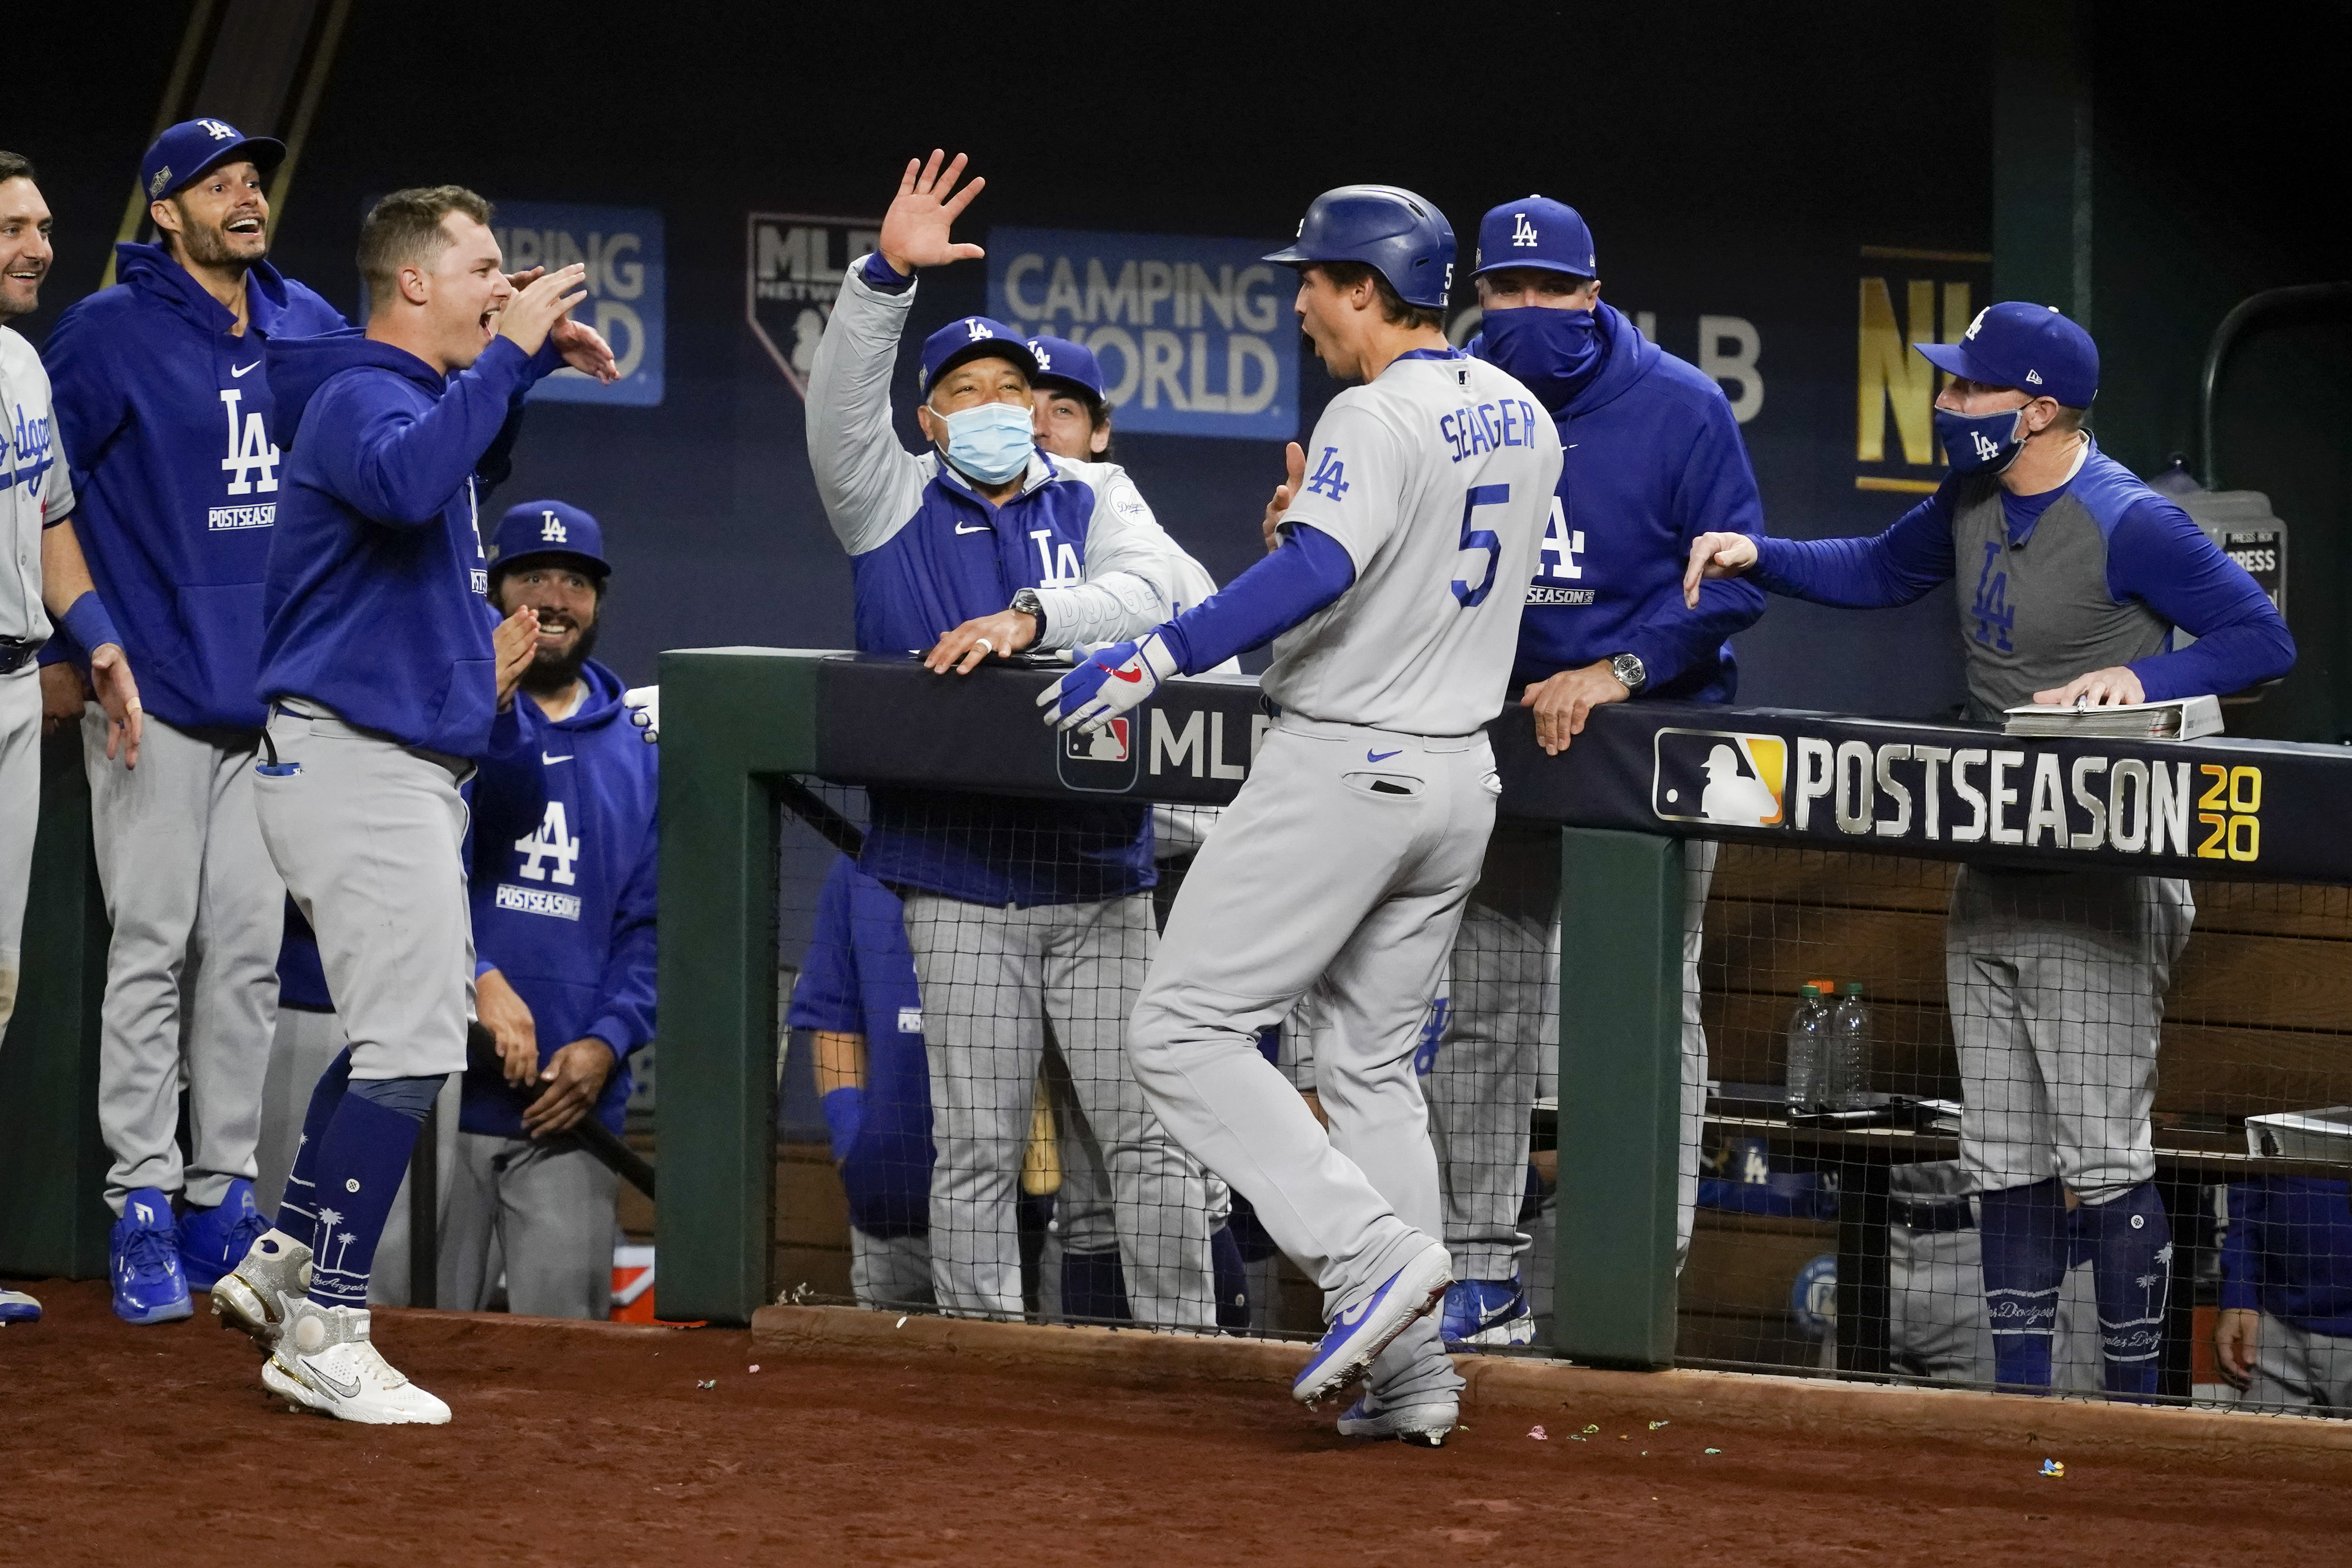 Corey Seager 2 run Home Run Game 2 of the 2017 World Series Photo